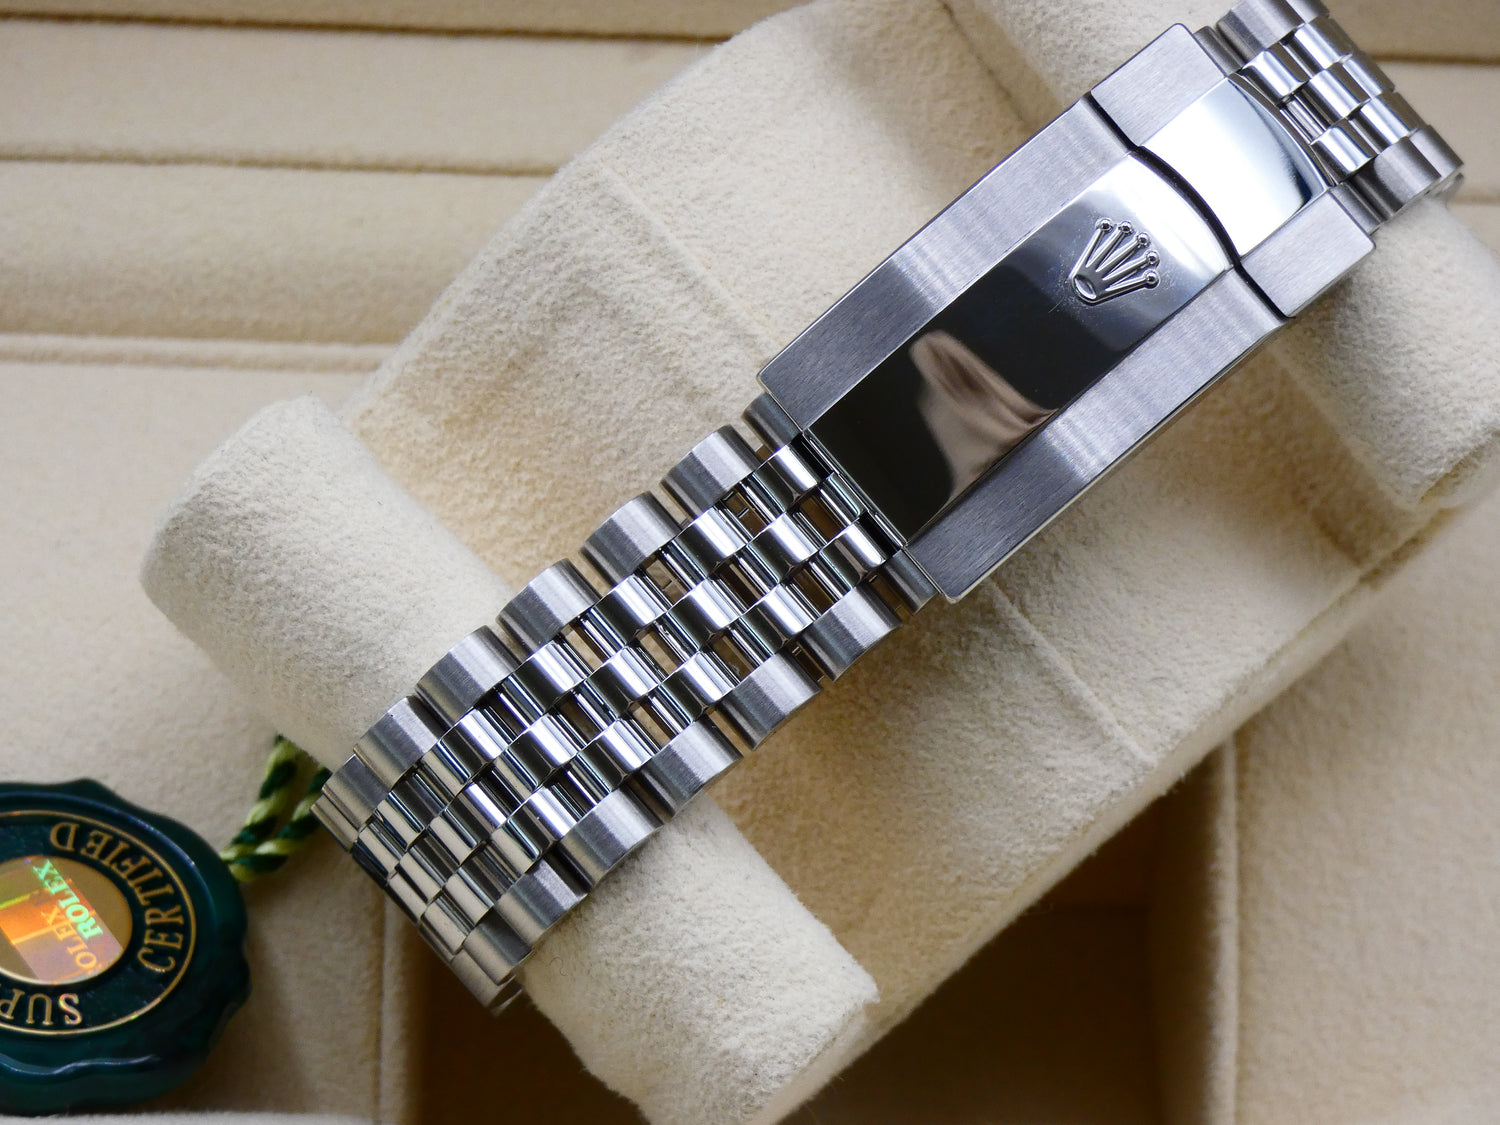 SOLD Rolex Datejust 41 new / green dial